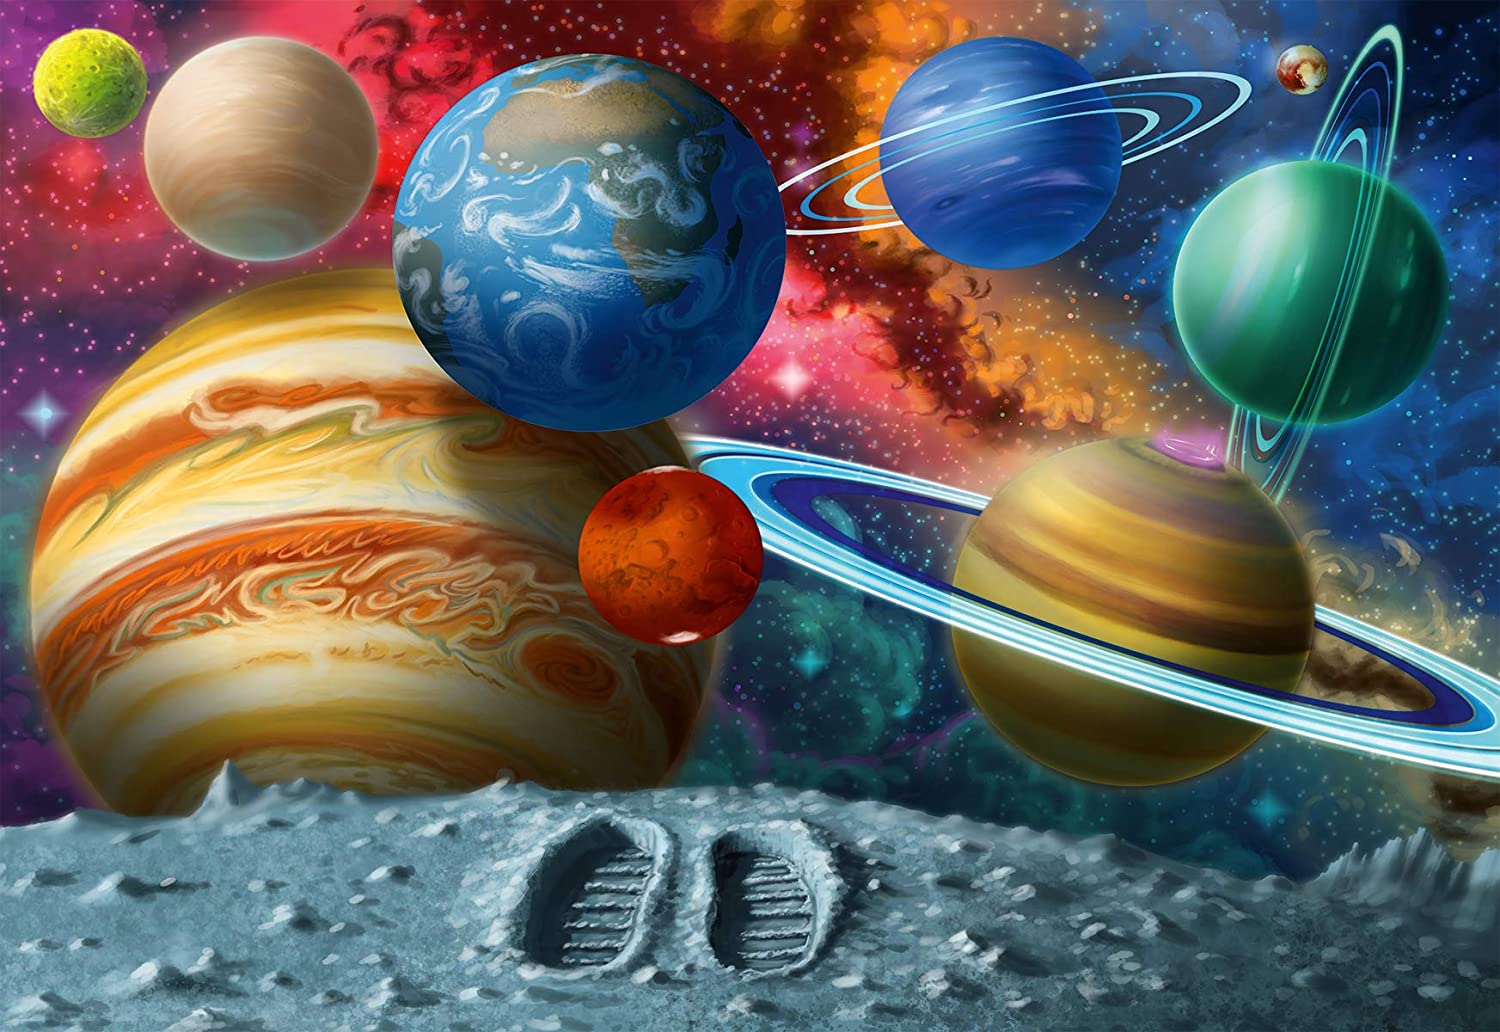 Ravensburger 24-Piece Stepping Into Space Floor Puzzle $9 + FS w/ Prime or on orders of $25+